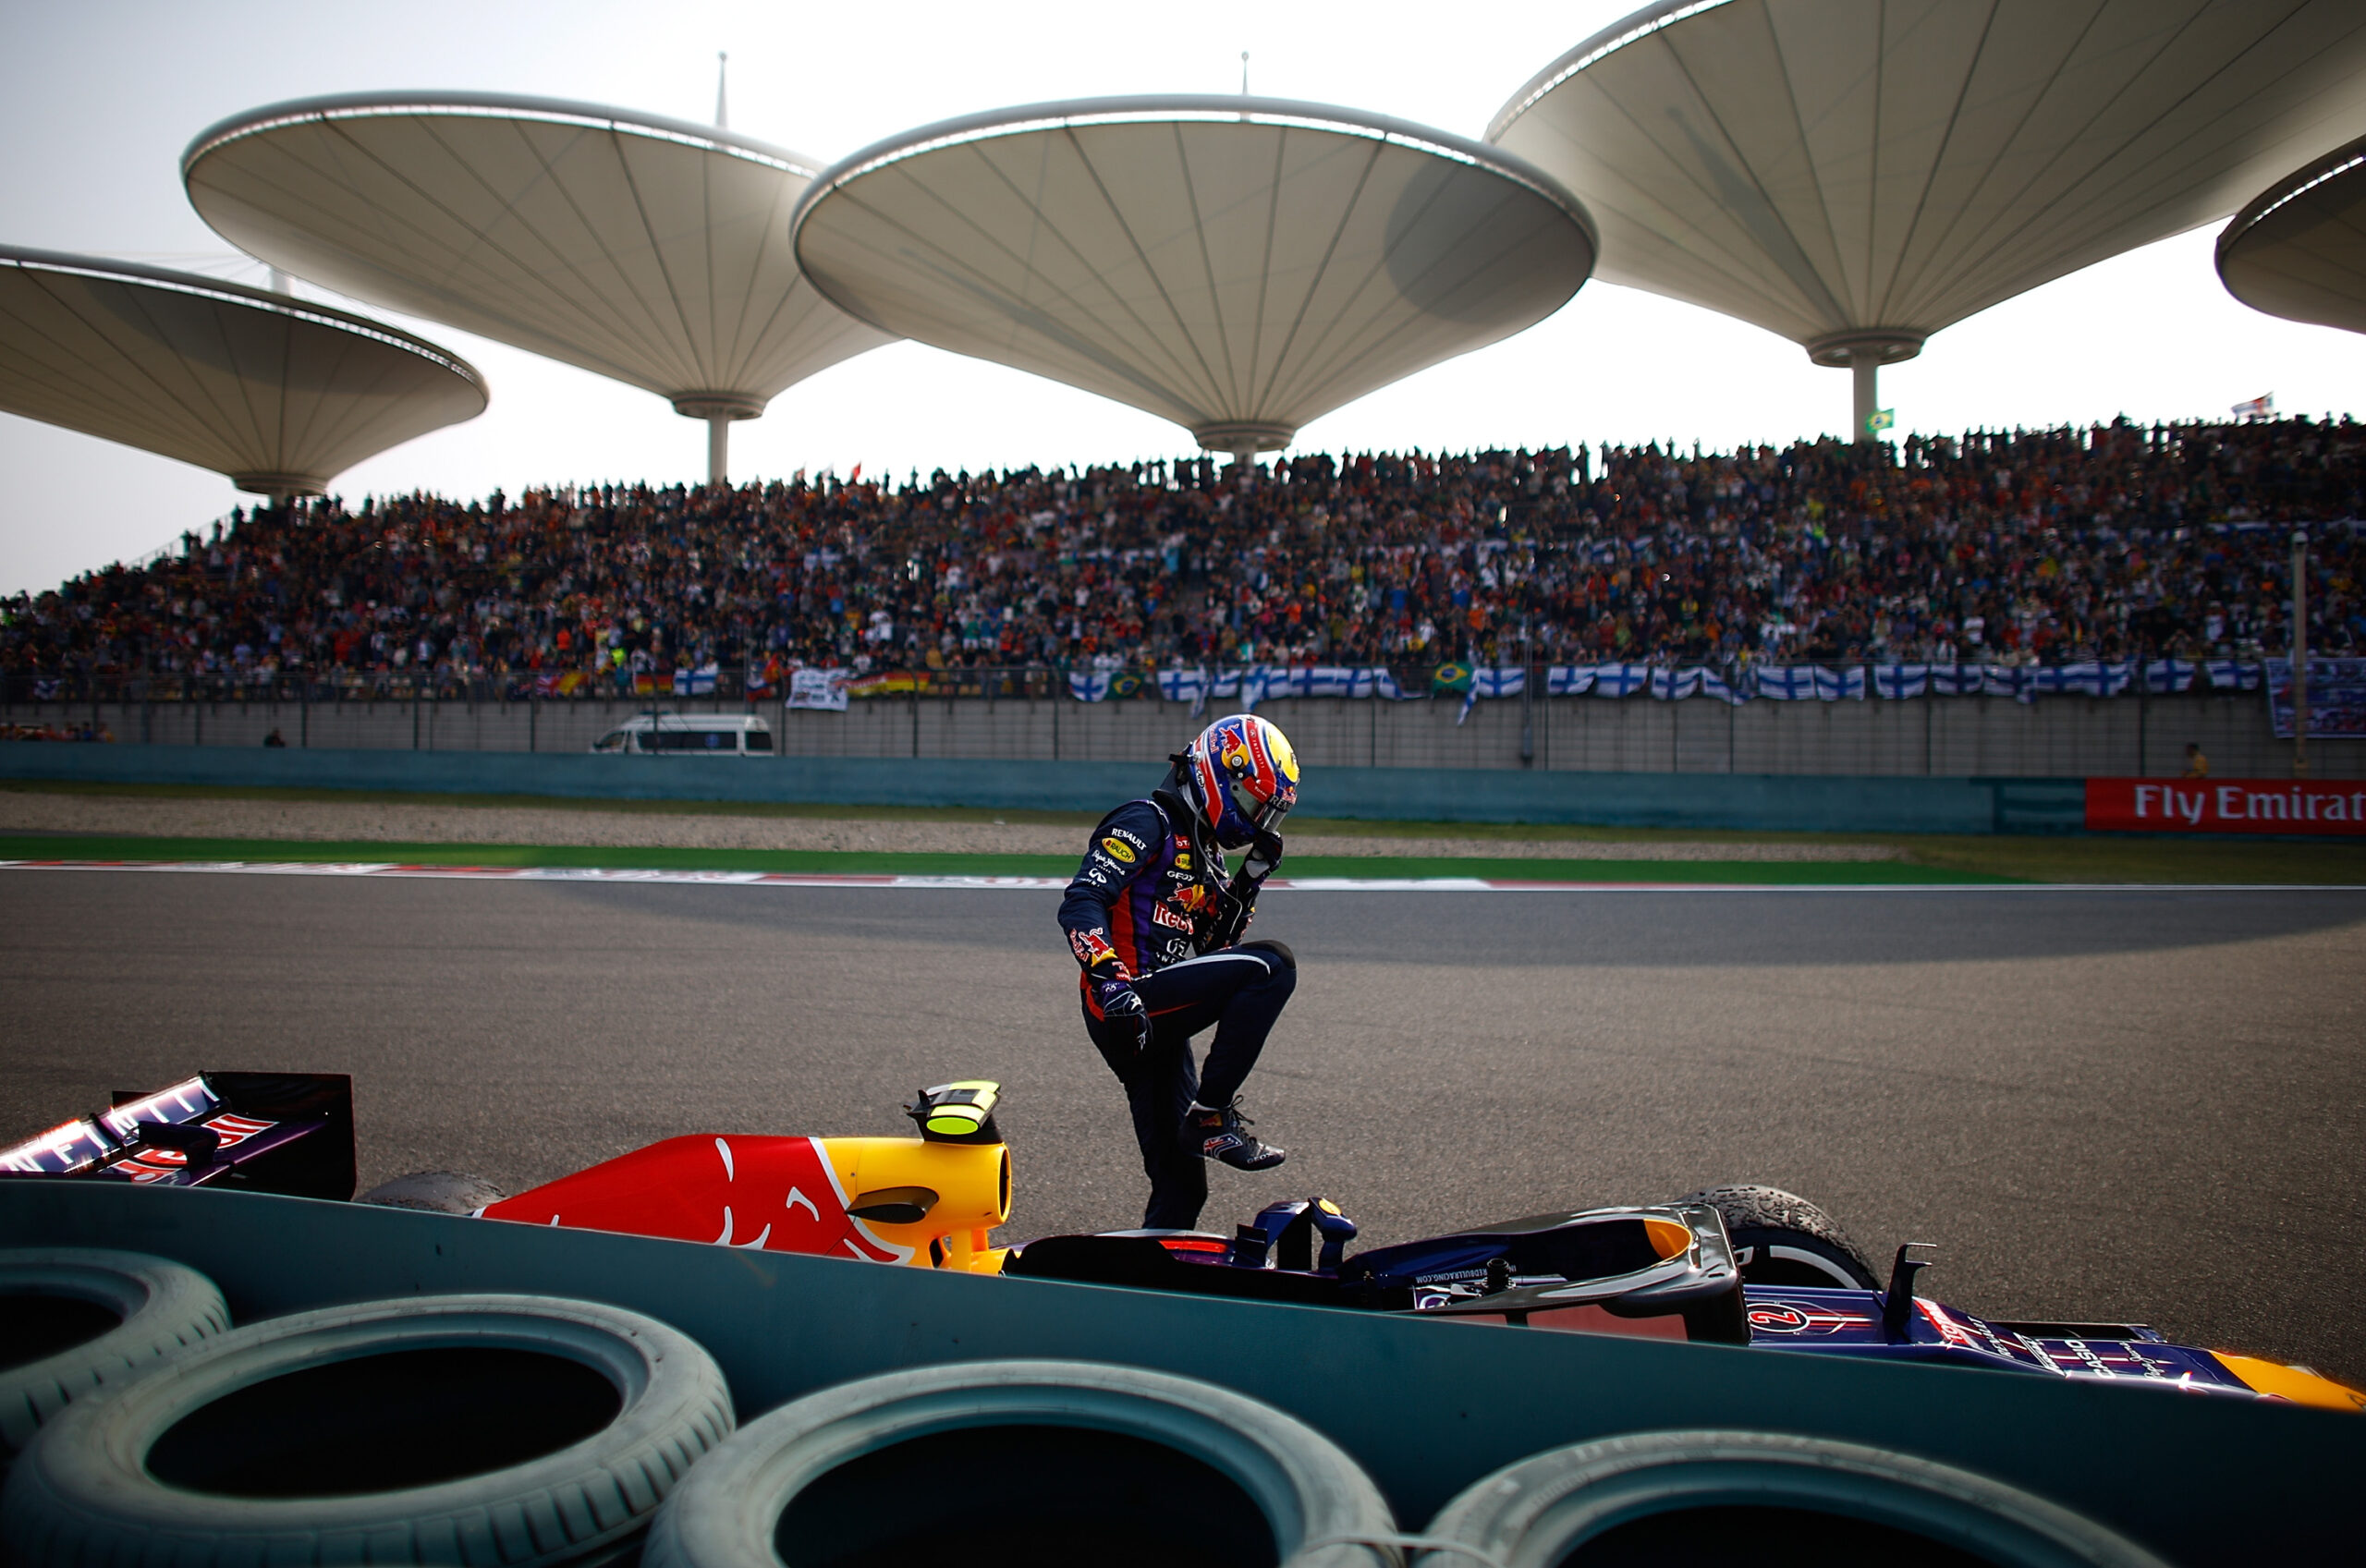 Chinese Grand Prix: Between Past And Present